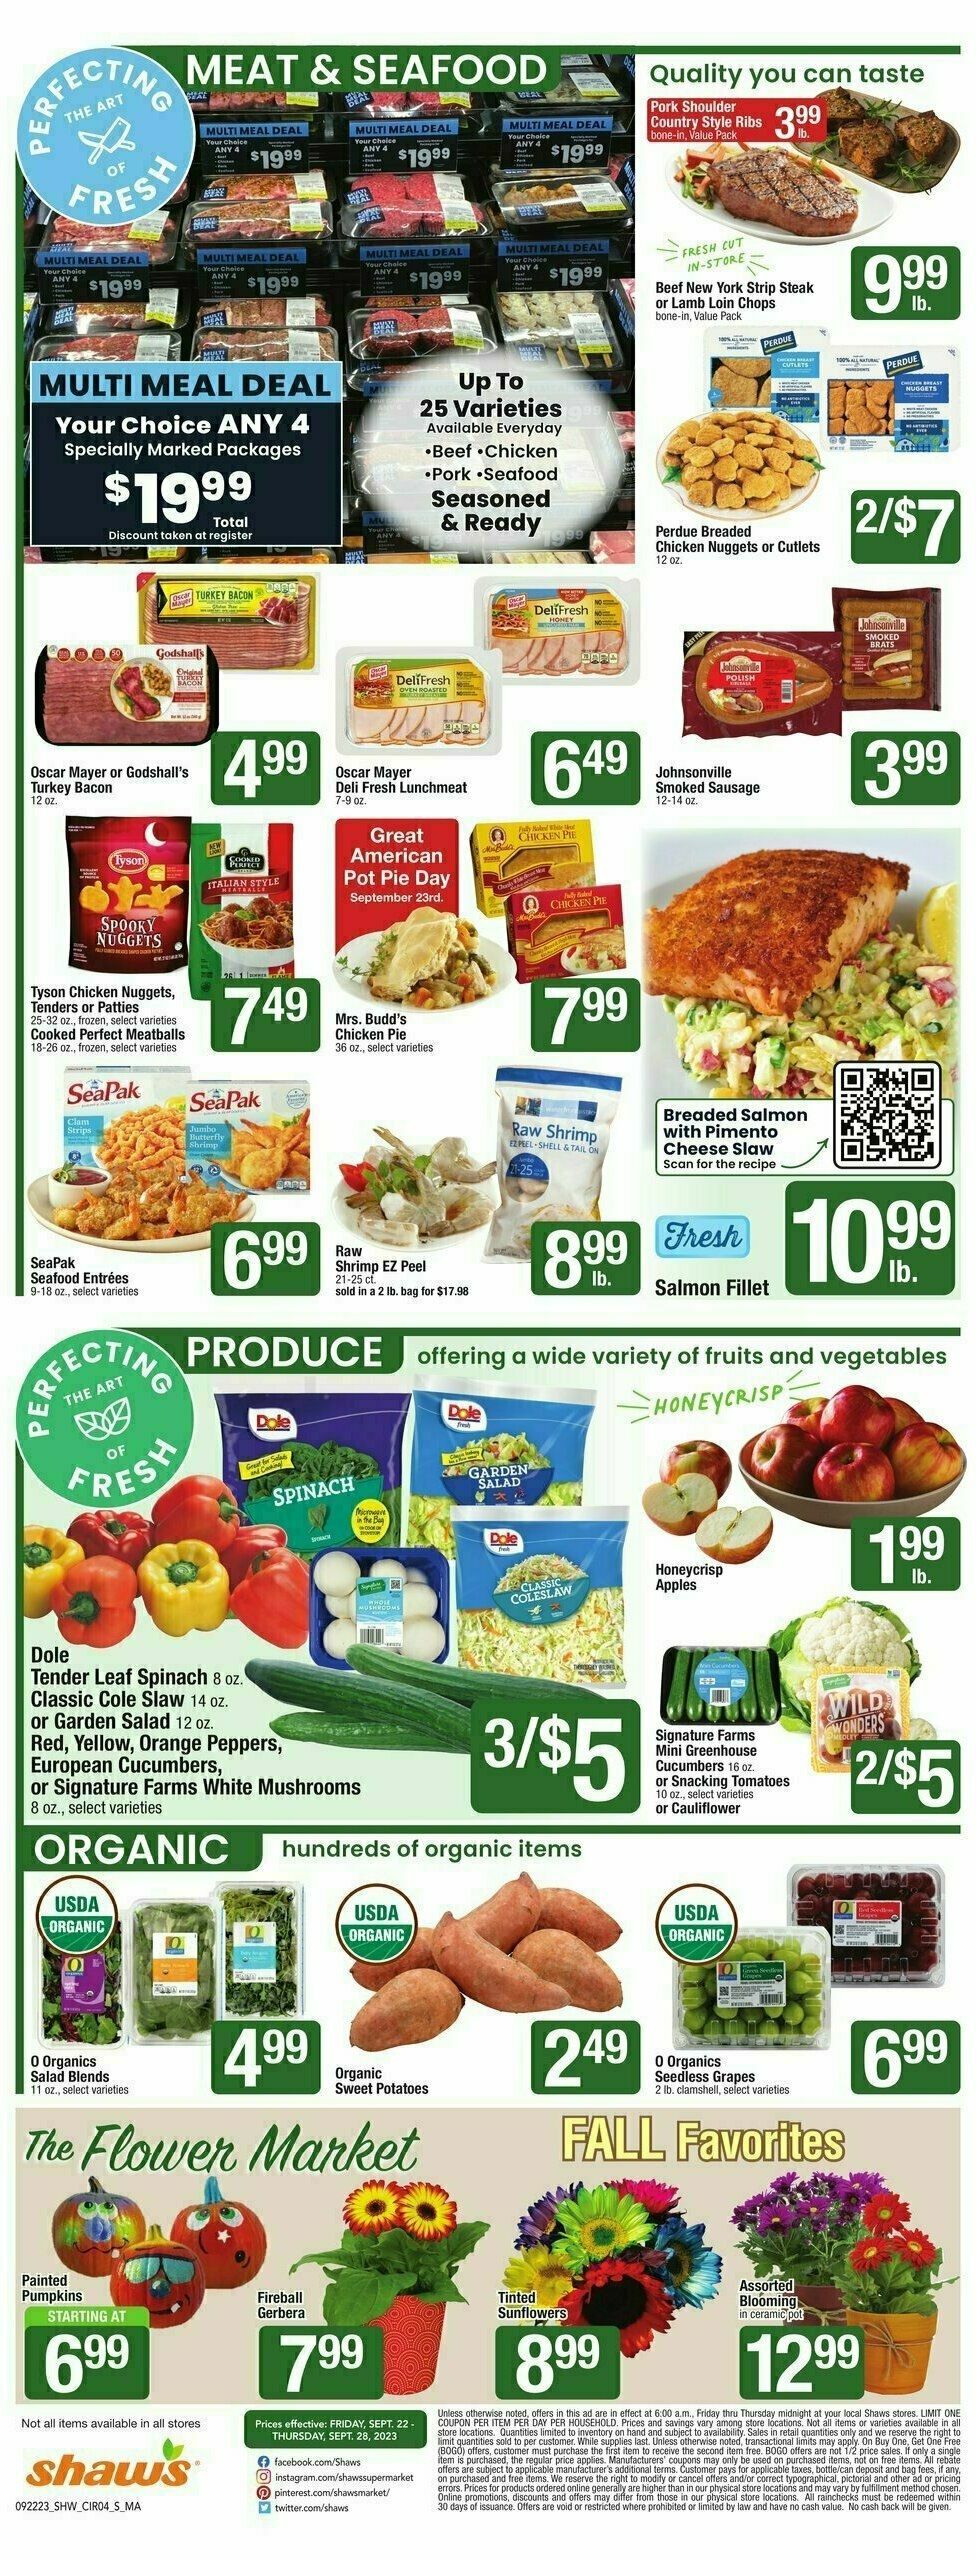 Shaw's Weekly Ad from September 22